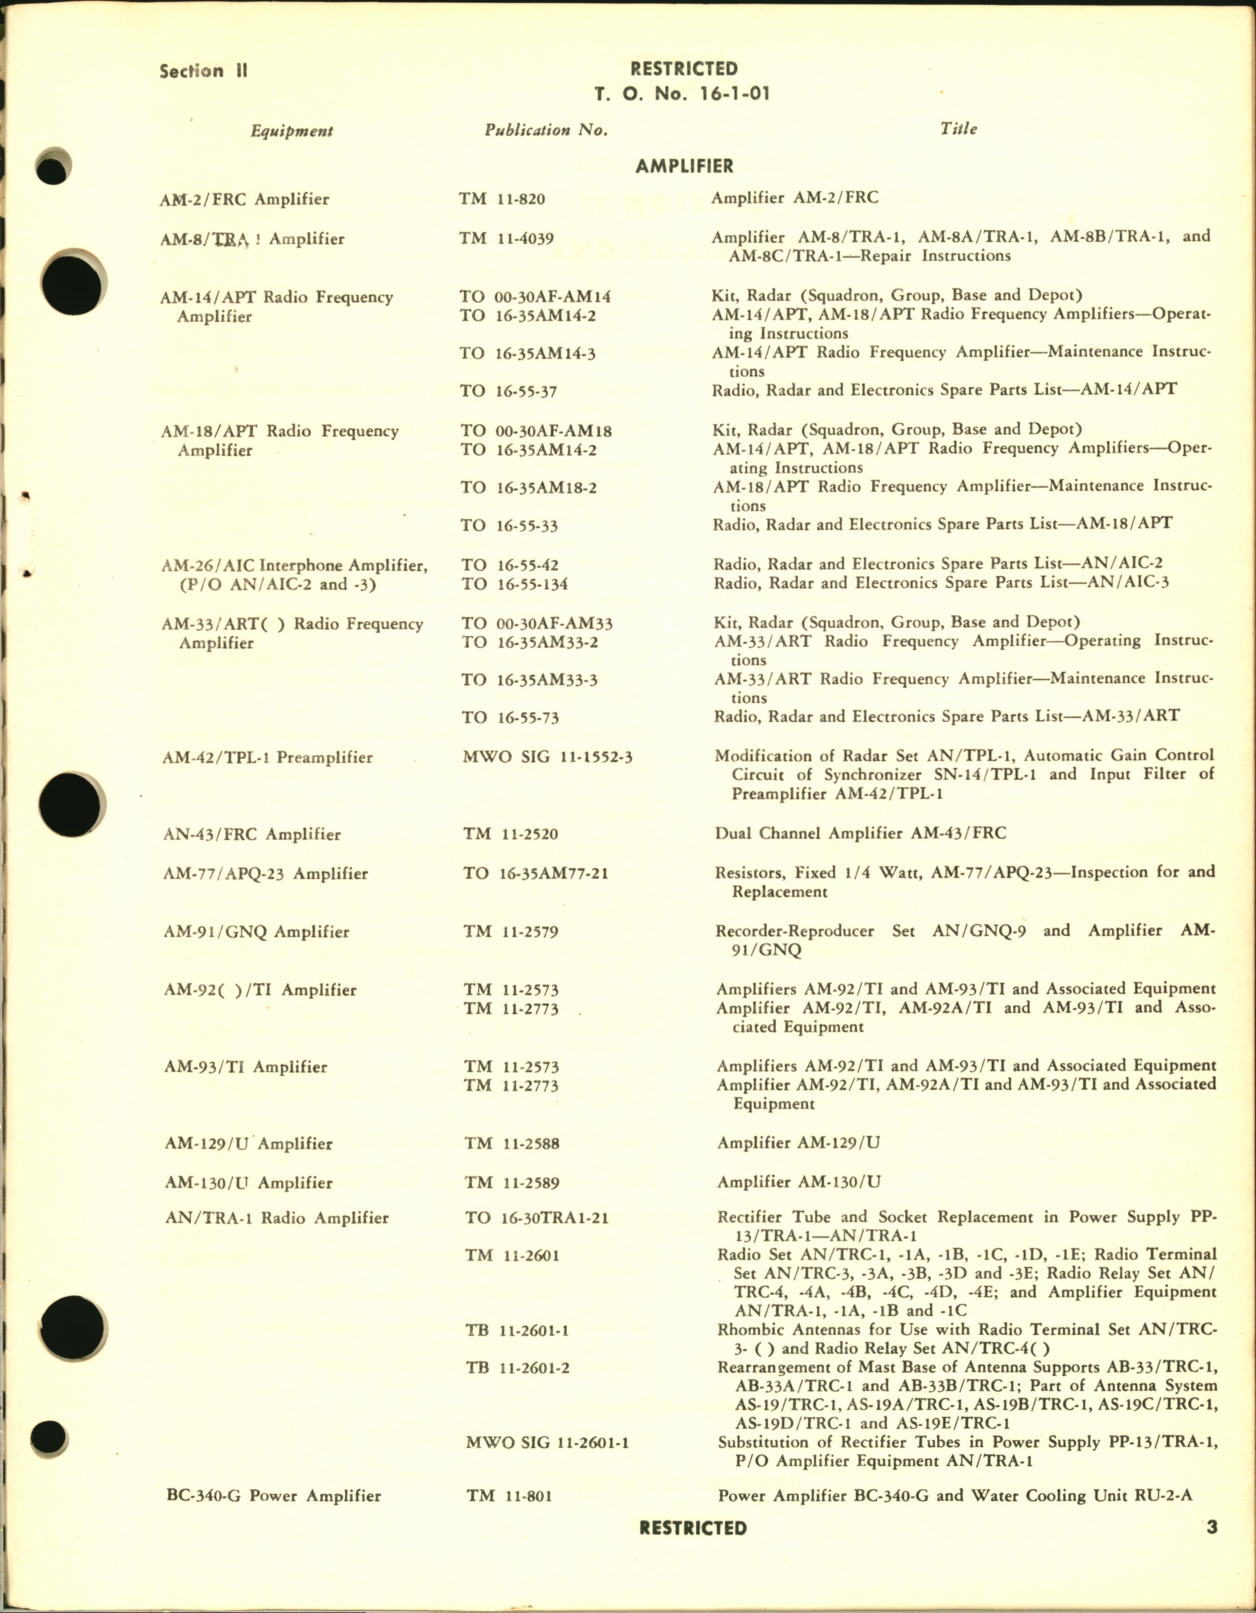 Sample page 5 from AirCorps Library document: List of Technical Publications - Communications Equipment